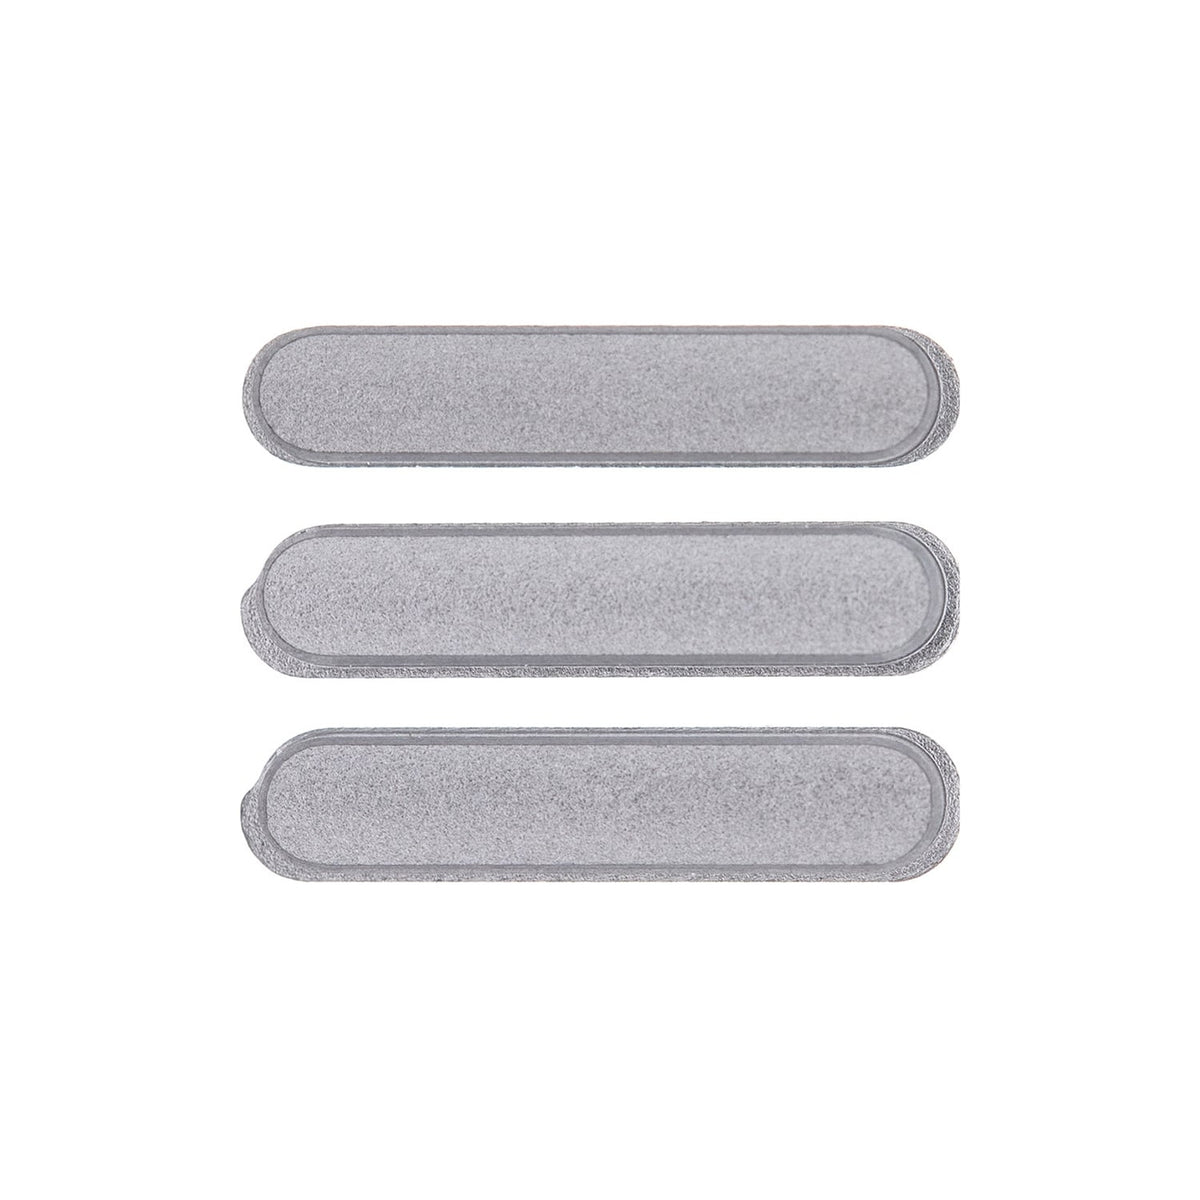 SIDE BUTTON SET FOR IPAD PRO 10.5/12.9 2ND/AIR 3 (3PCS/SET) - GREY